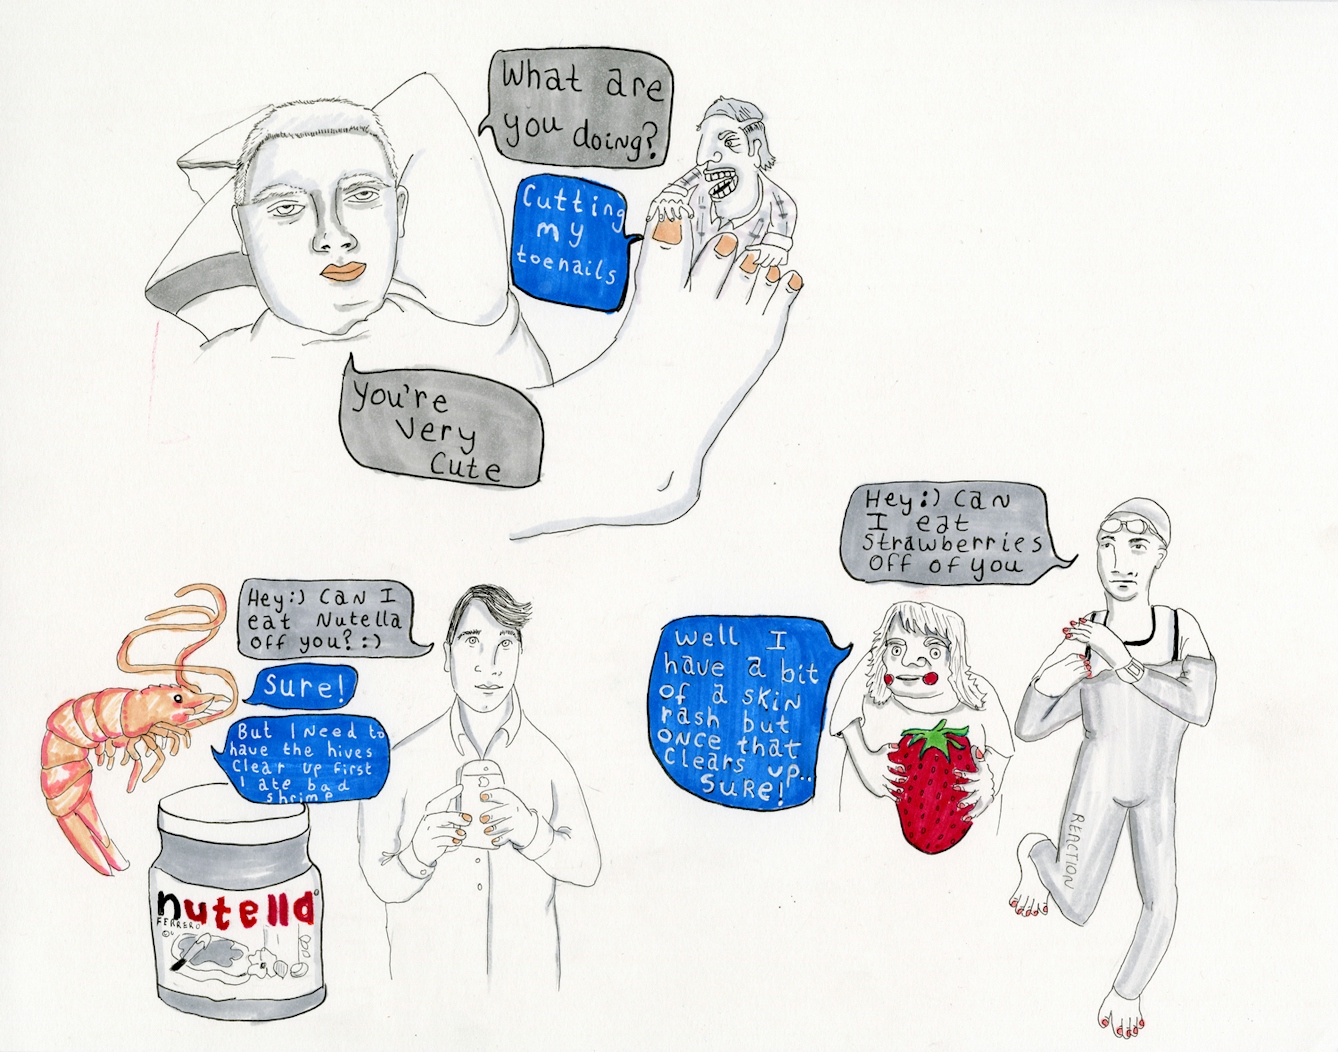 Pen and ink sketches of people, with their Tinder comments handwritten inside speech bubbles.